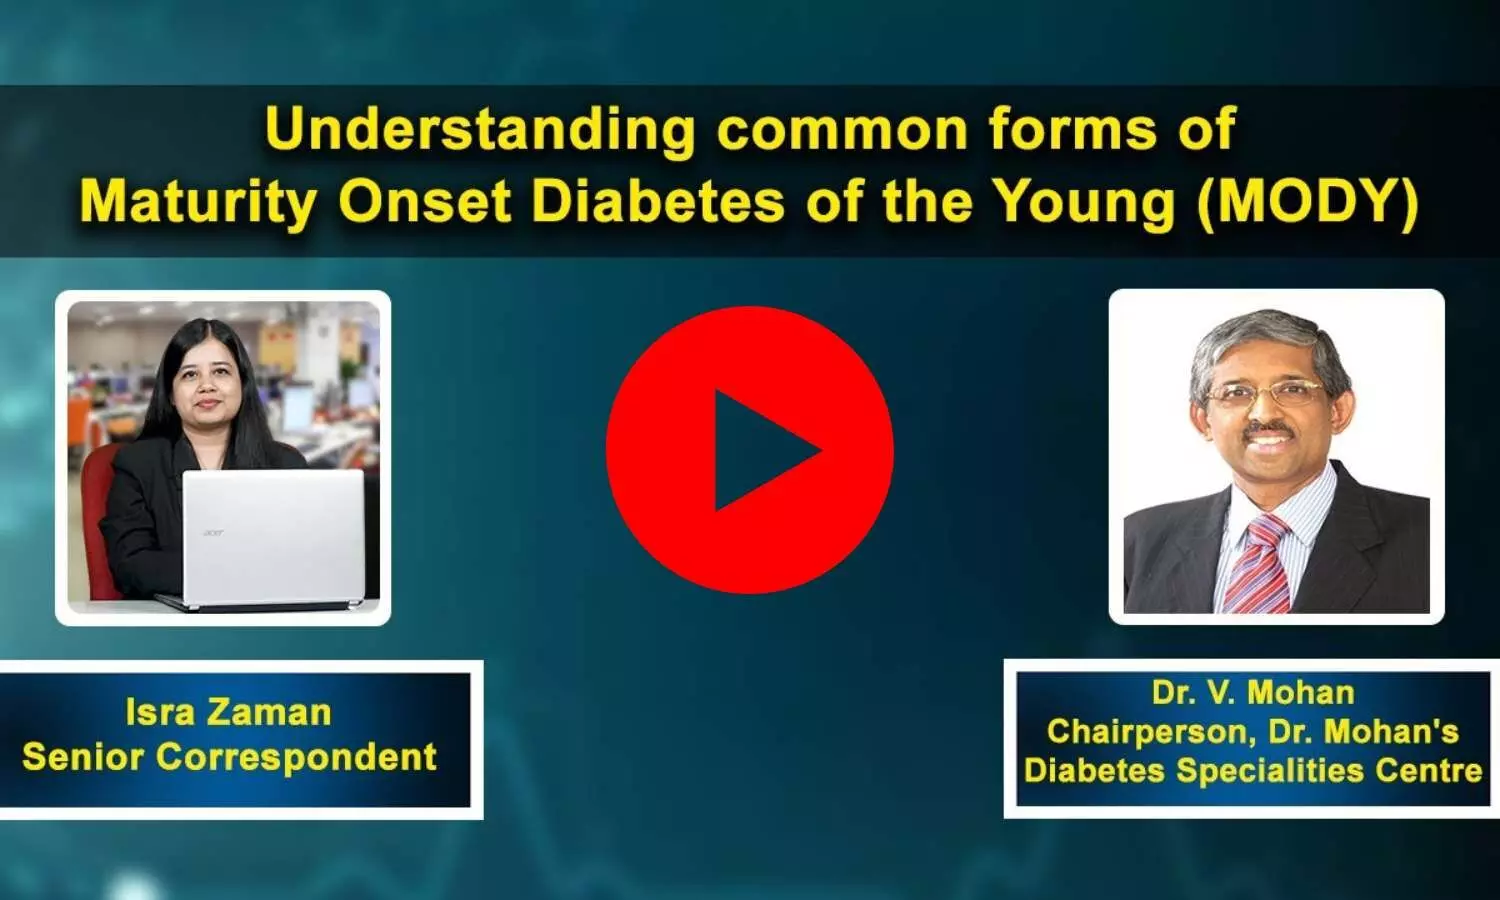 Prevalence, clinical features and complications of common forms of MODY Ft. Dr V Mohan